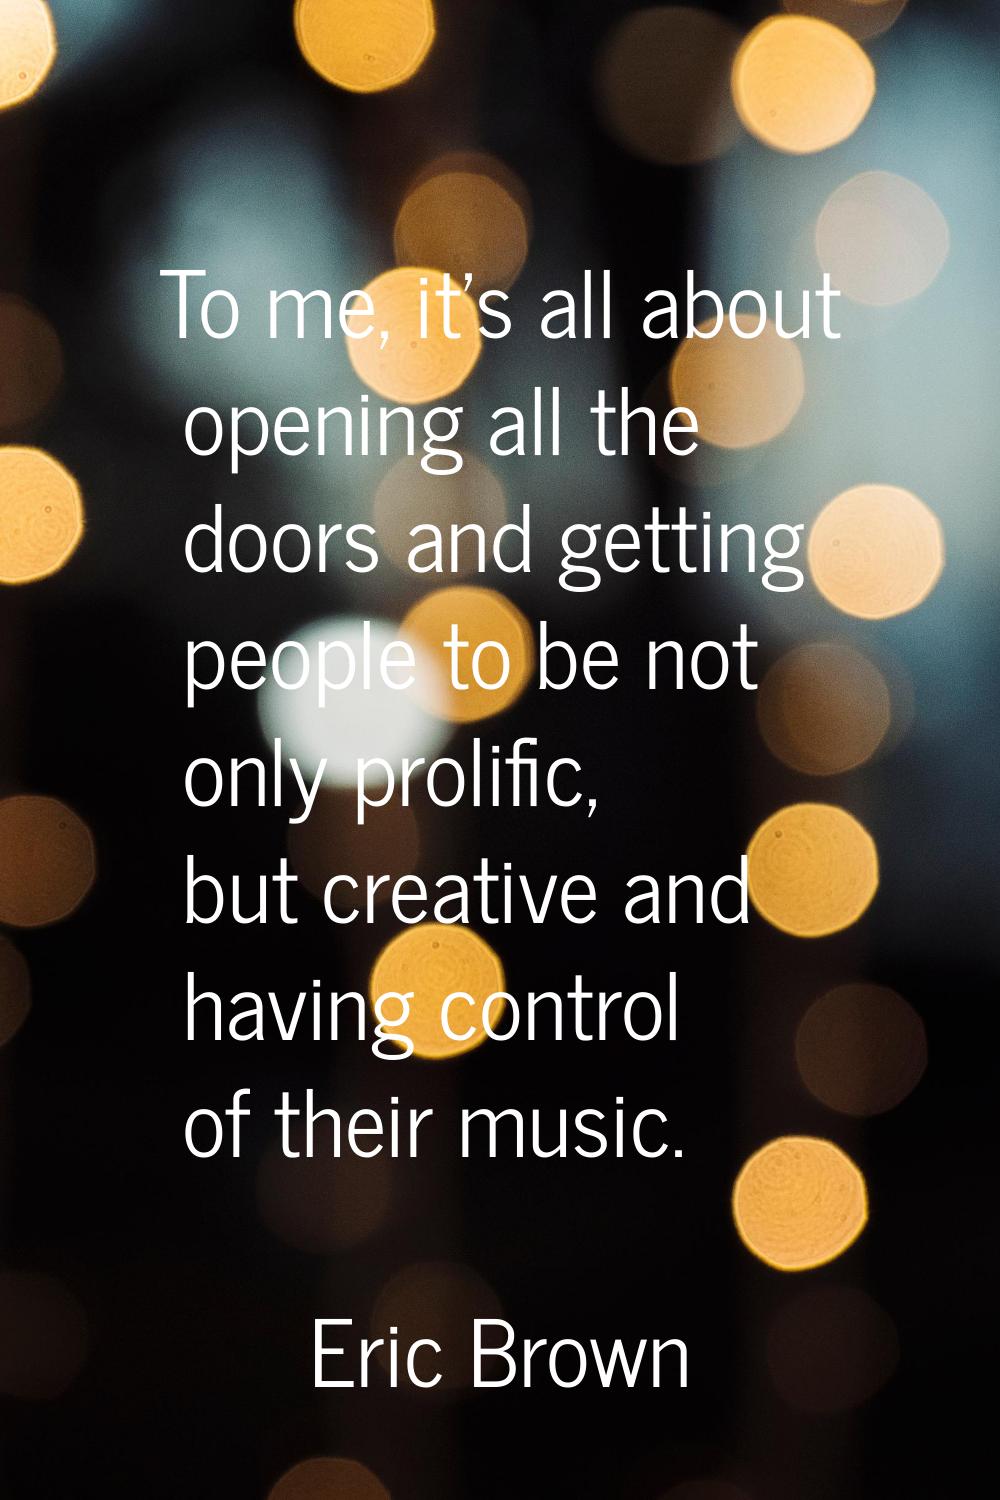 To me, it's all about opening all the doors and getting people to be not only prolific, but creativ